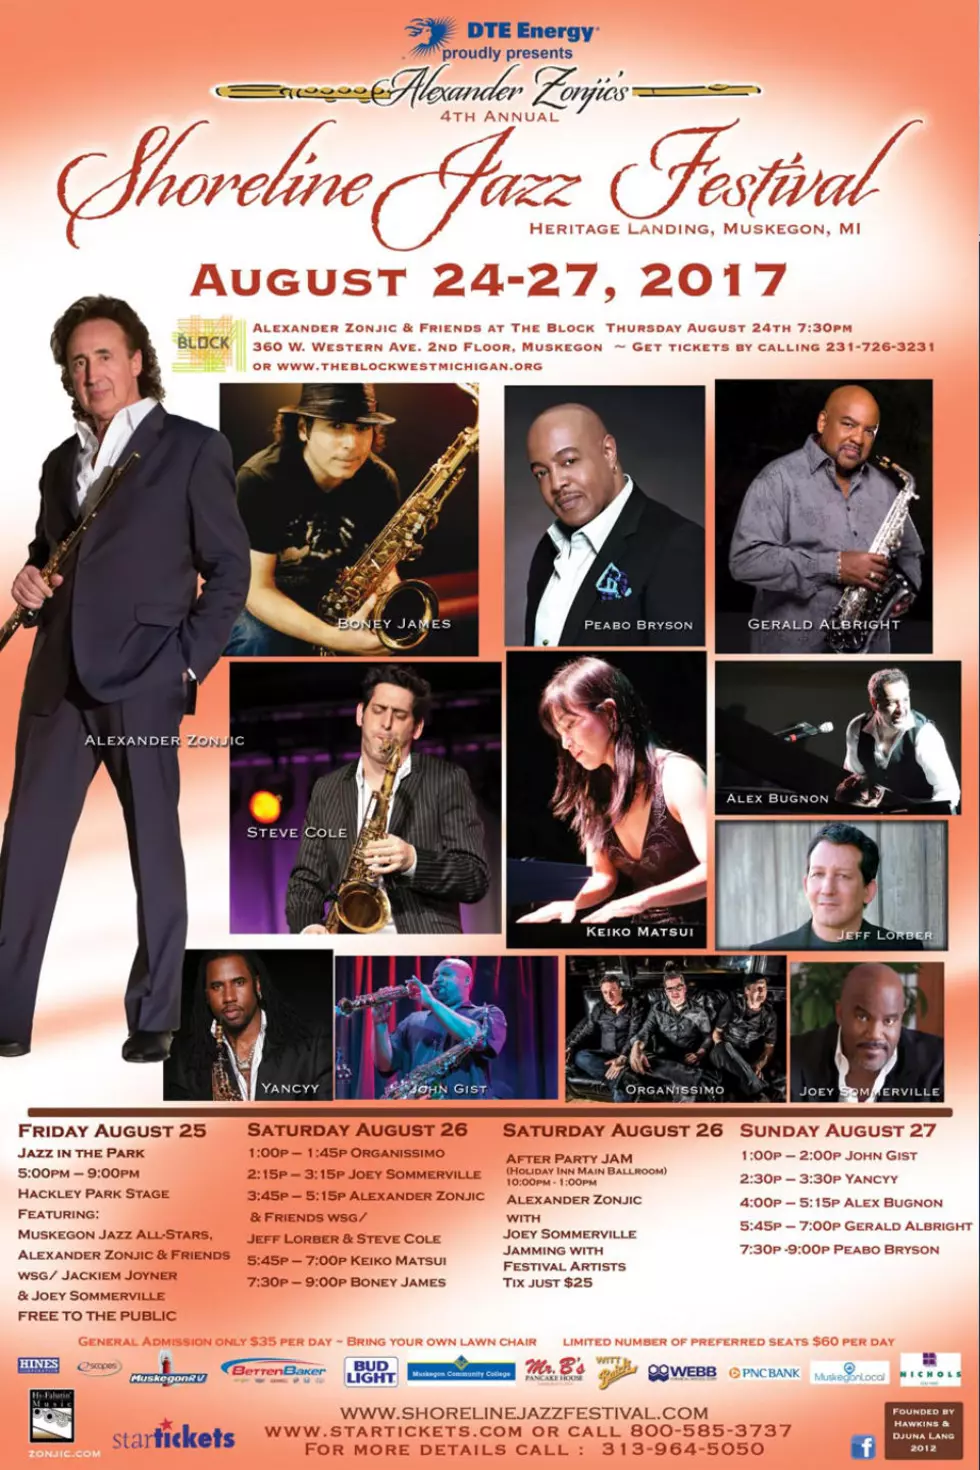 Win tickets to the Shoreline Jazz Festival from the Old School House